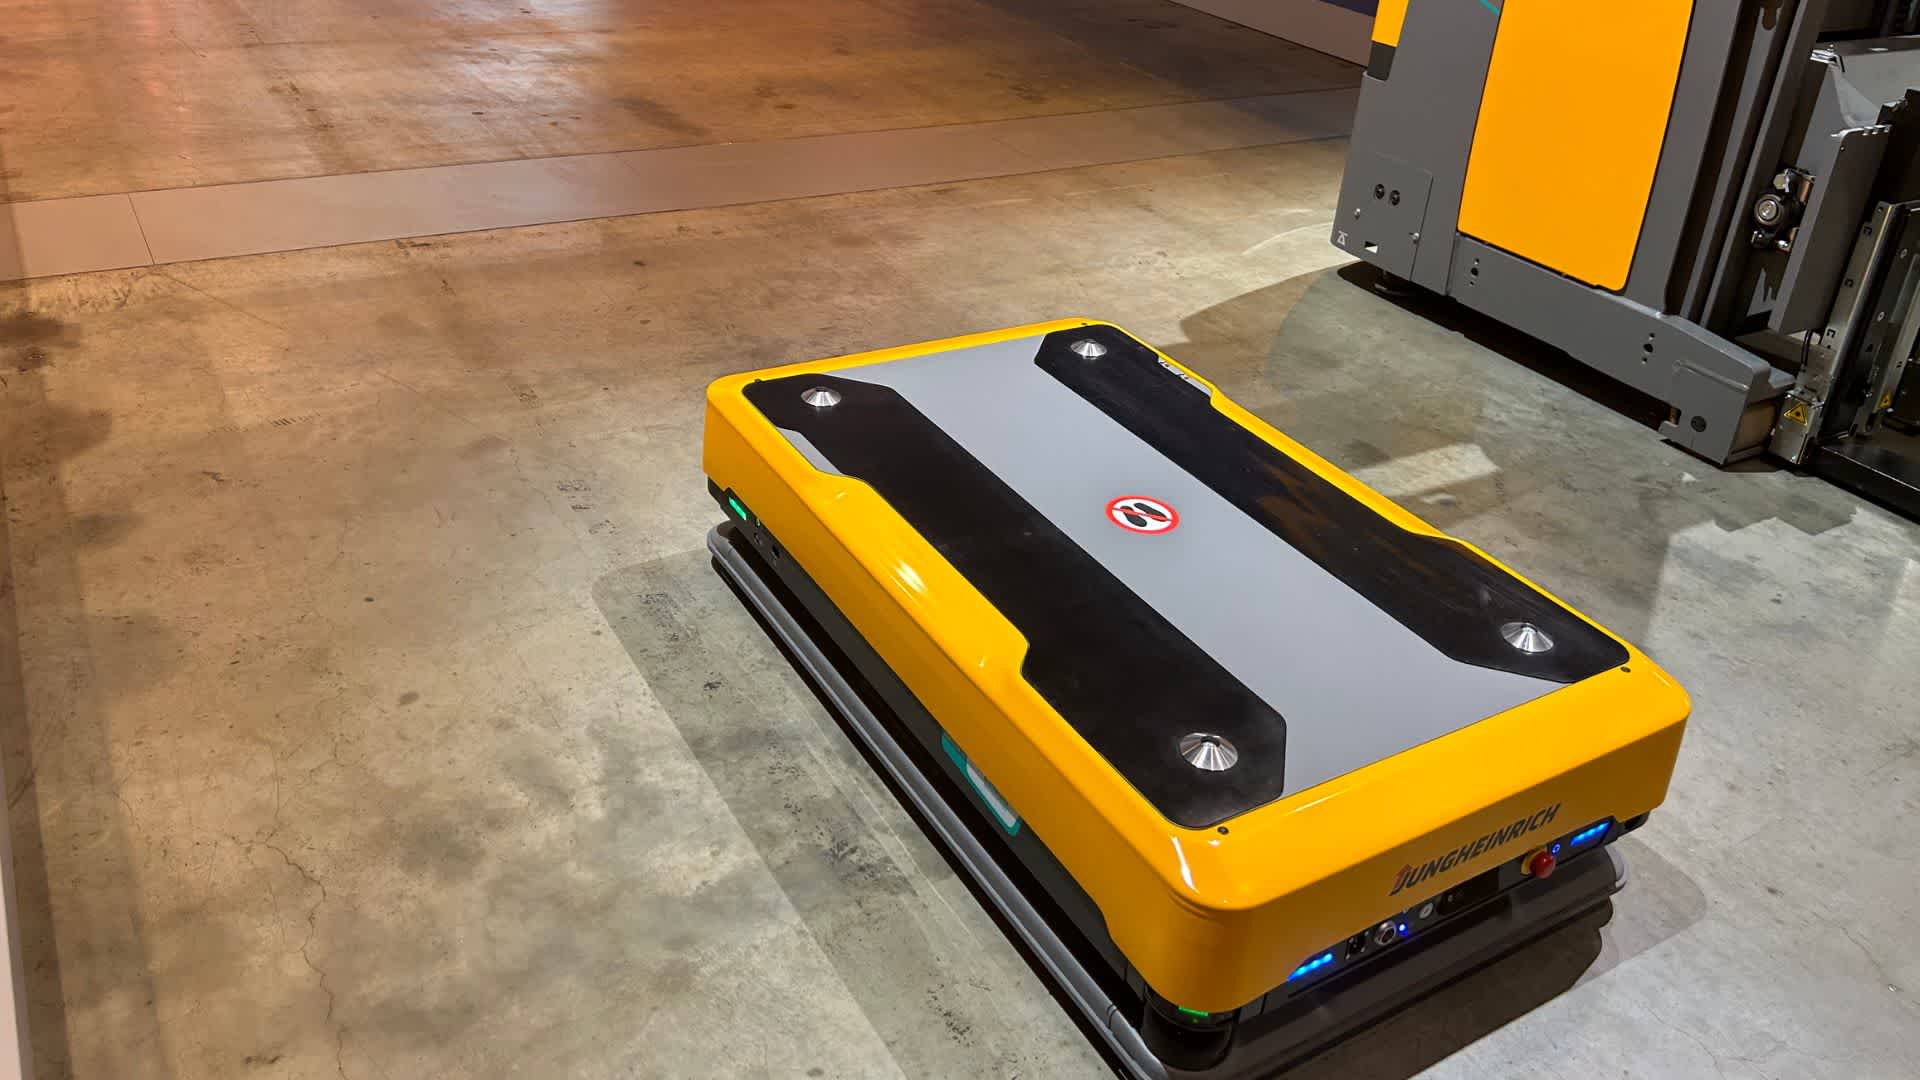 LogiMAT Automated Guided Vehicle